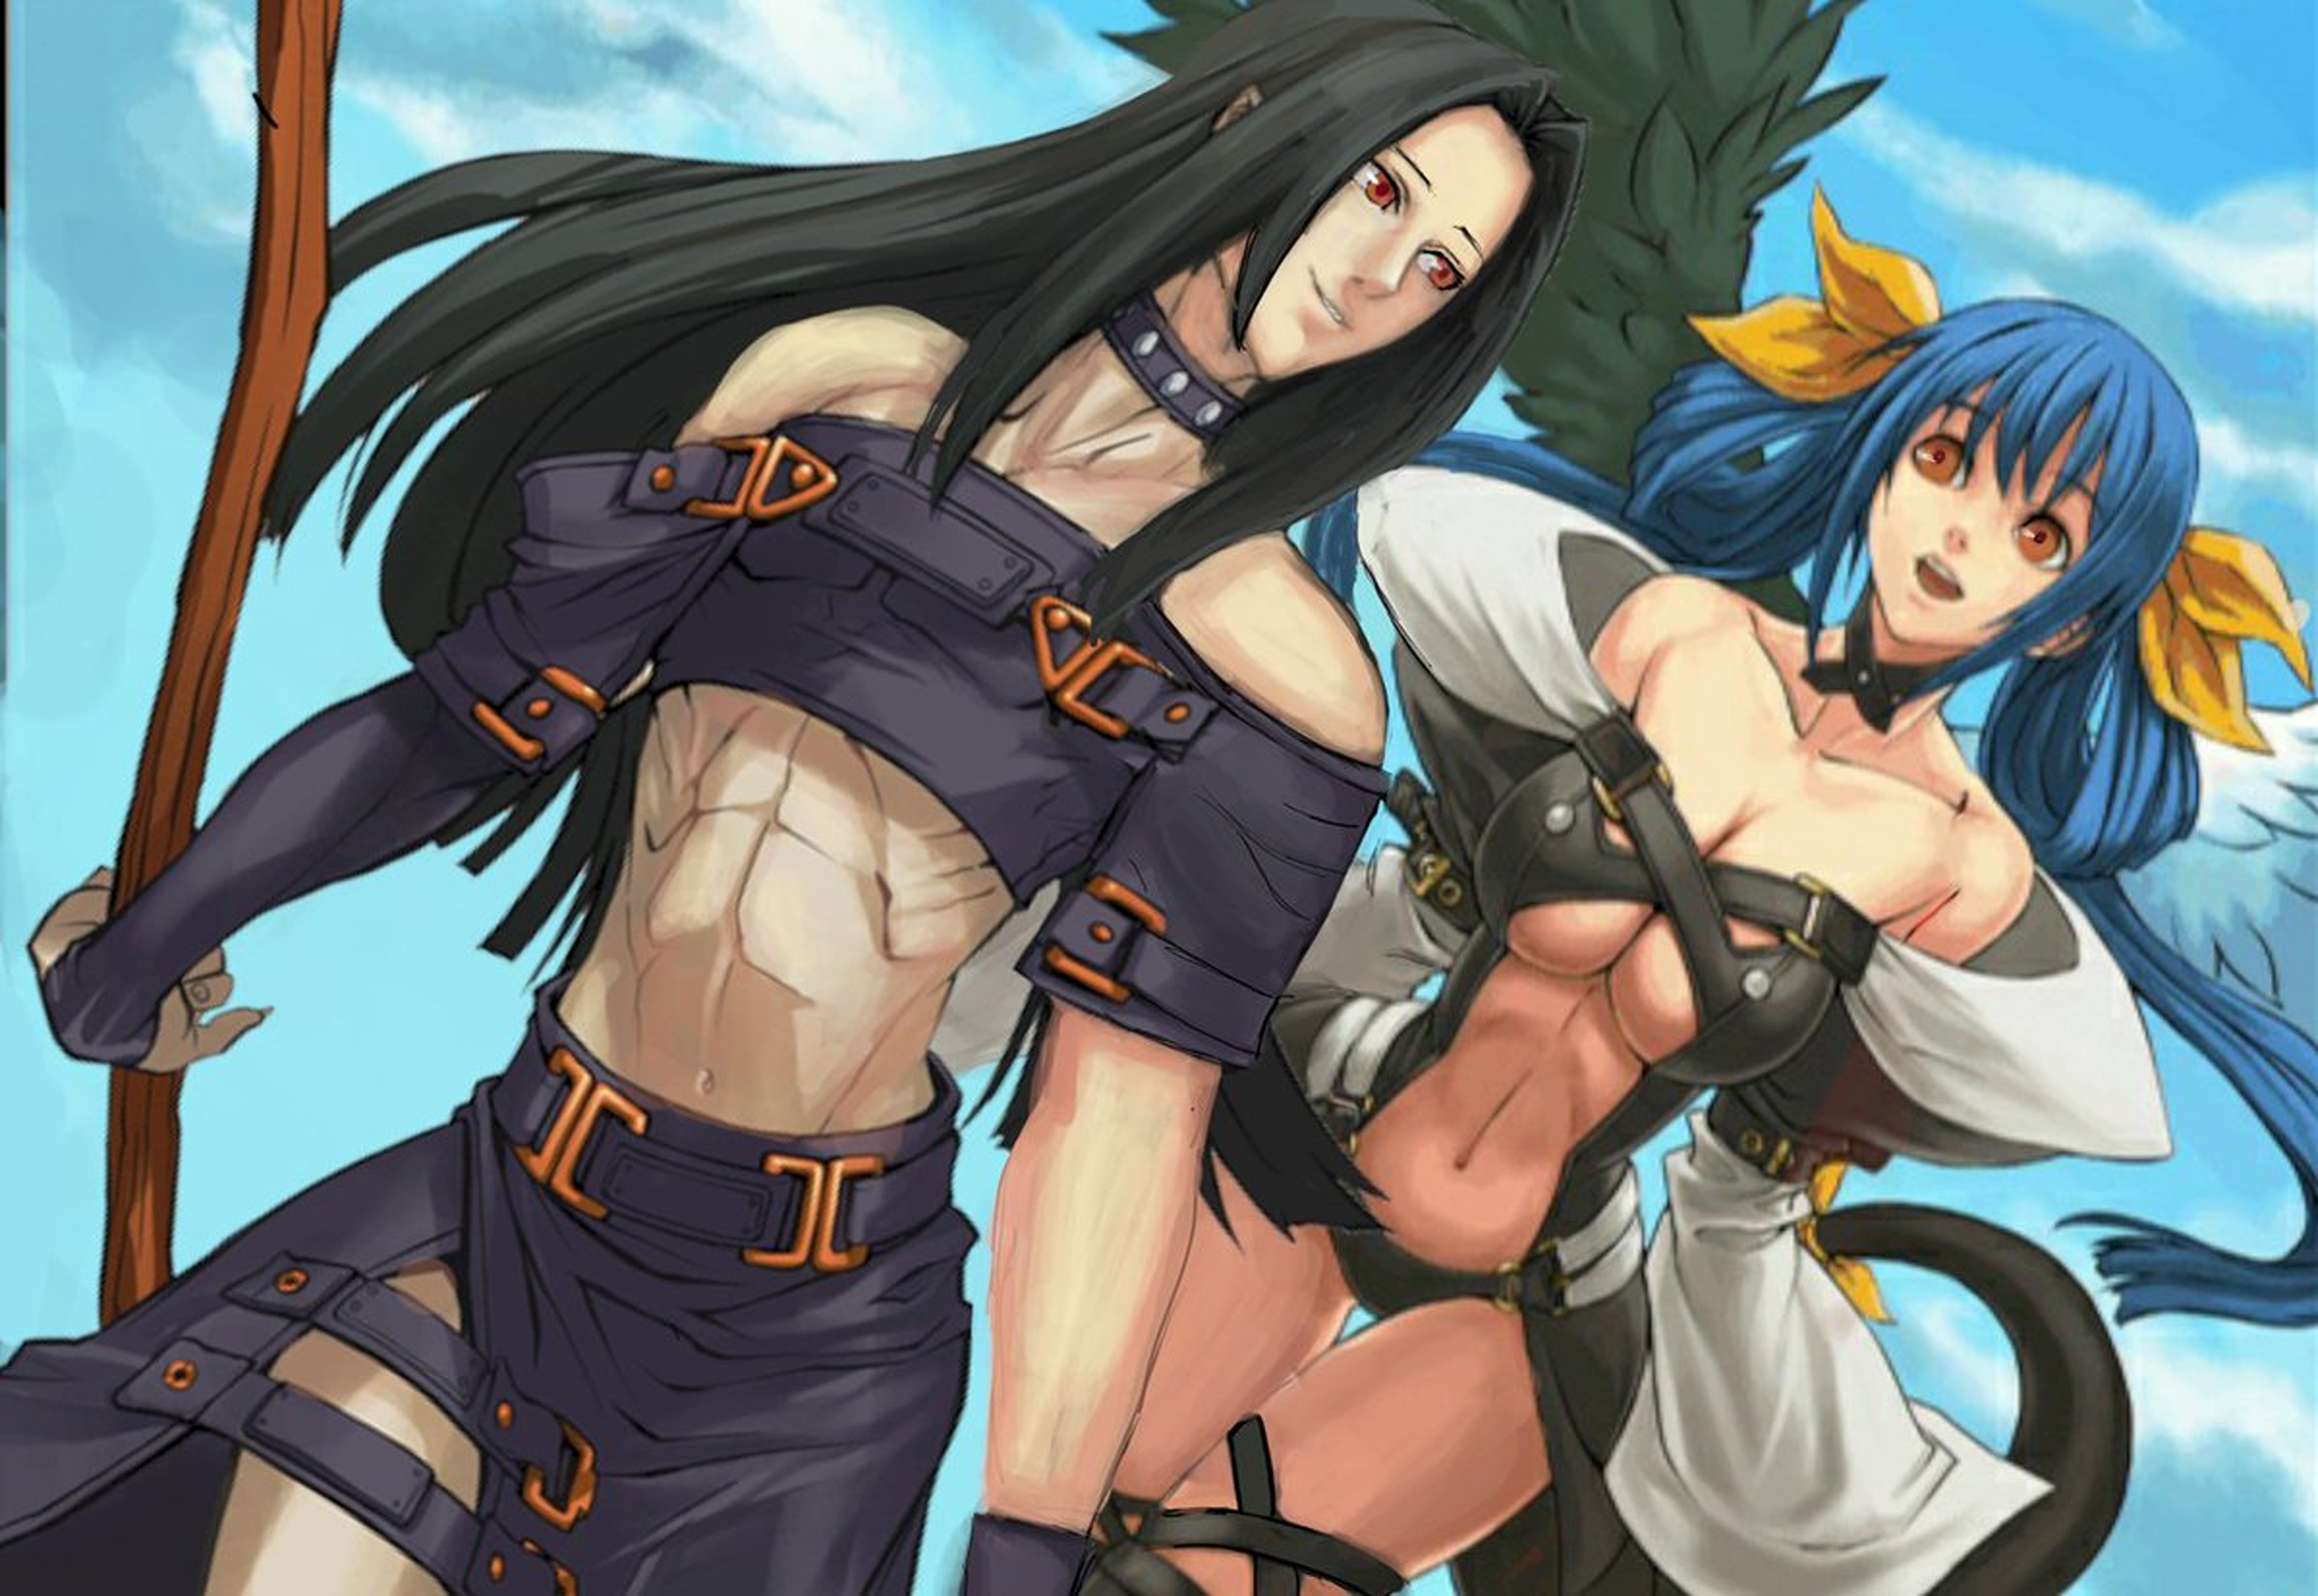 Anime 2424x1669 Guilty Gear XX Guilty Gear anime couple anime games video game art fighting games video games angel wings anime girl with wings anime girls Tesdizzy (guilty_gear) long hair